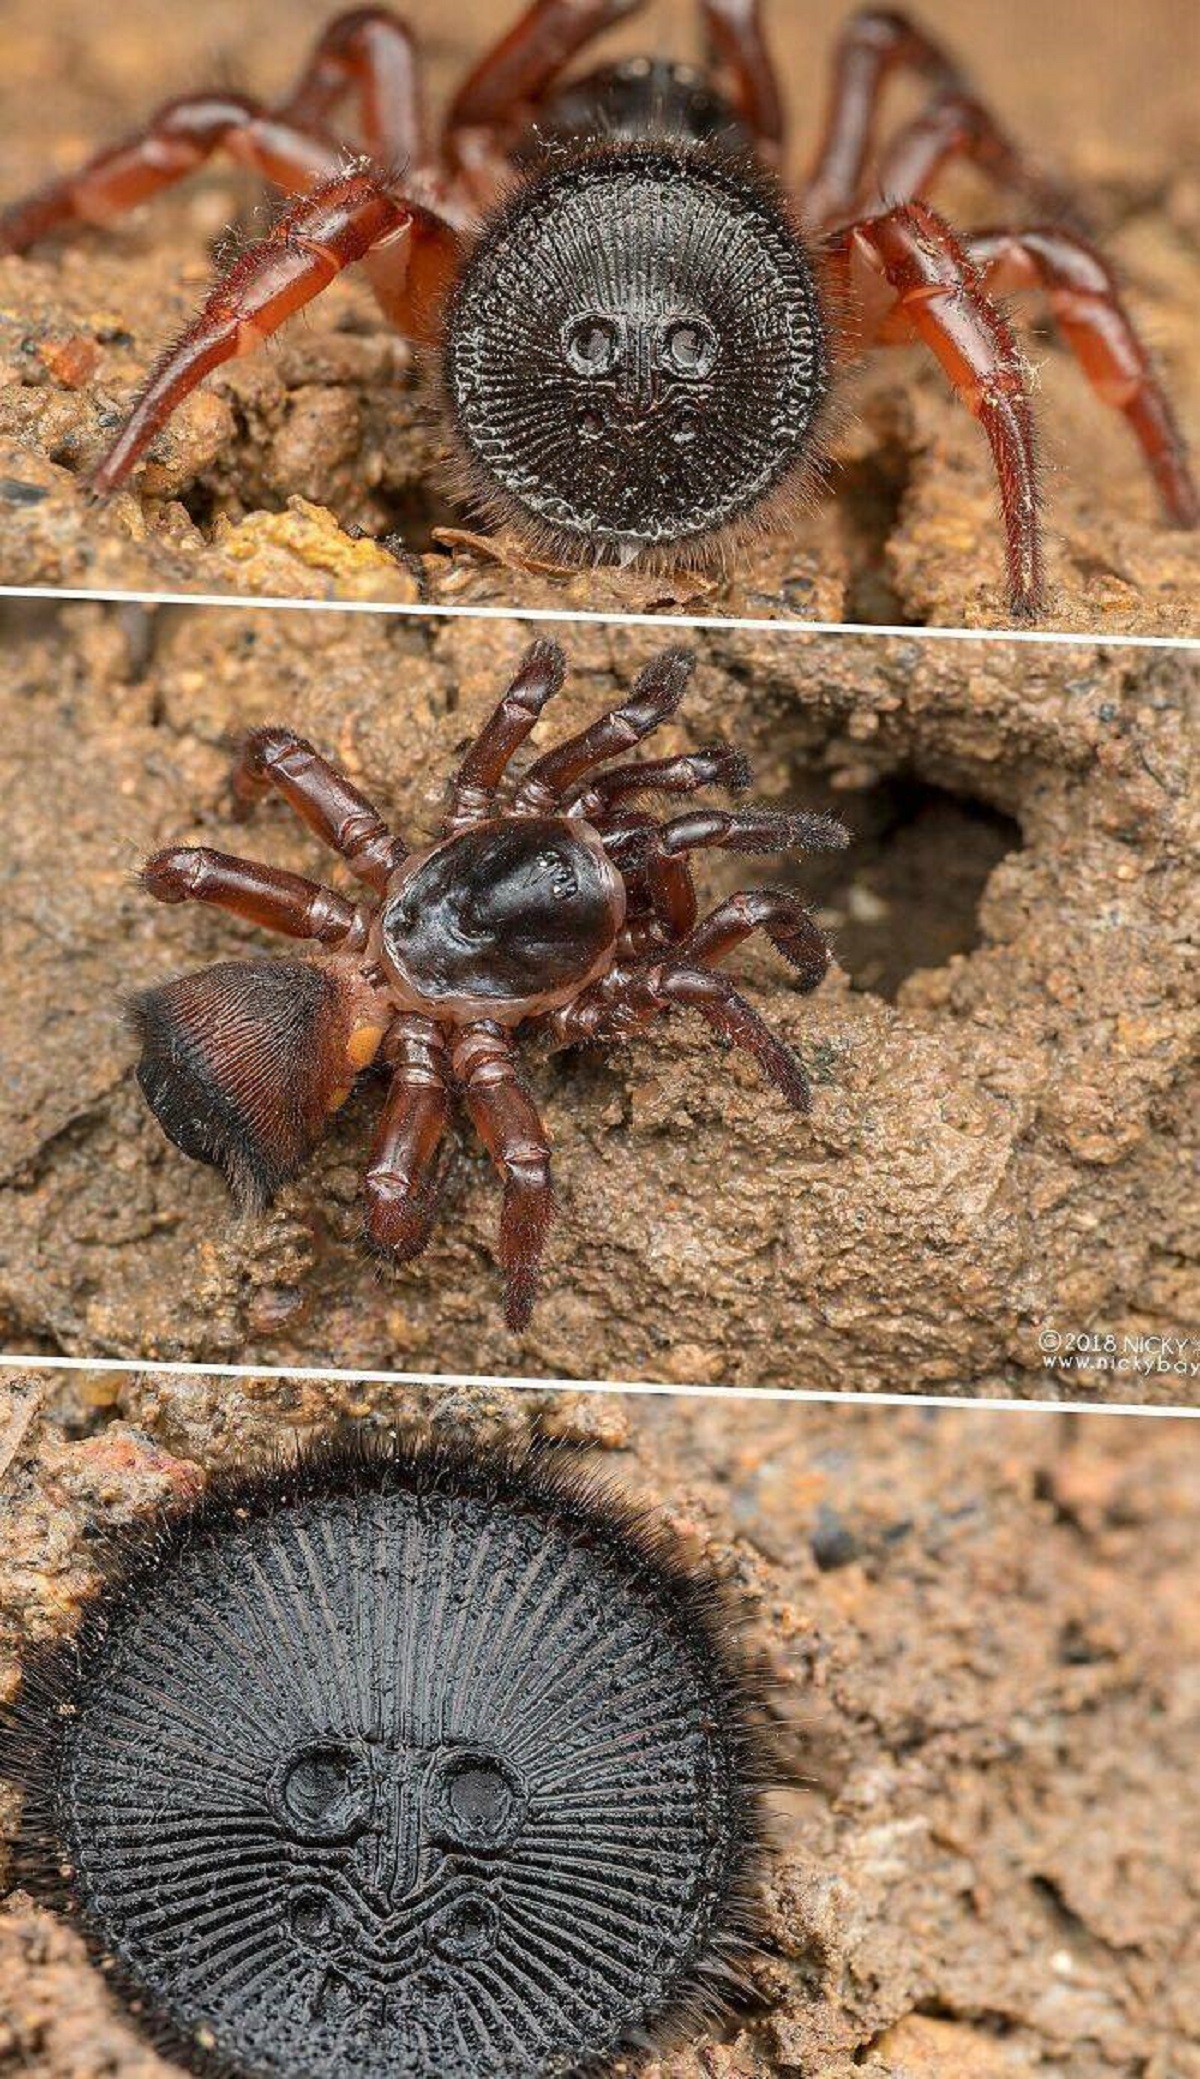 "The Cork-Lid Trapdoor Spider. If You See What Looks Like An Ancient Coin Buried In Sand, Leave It Alone"